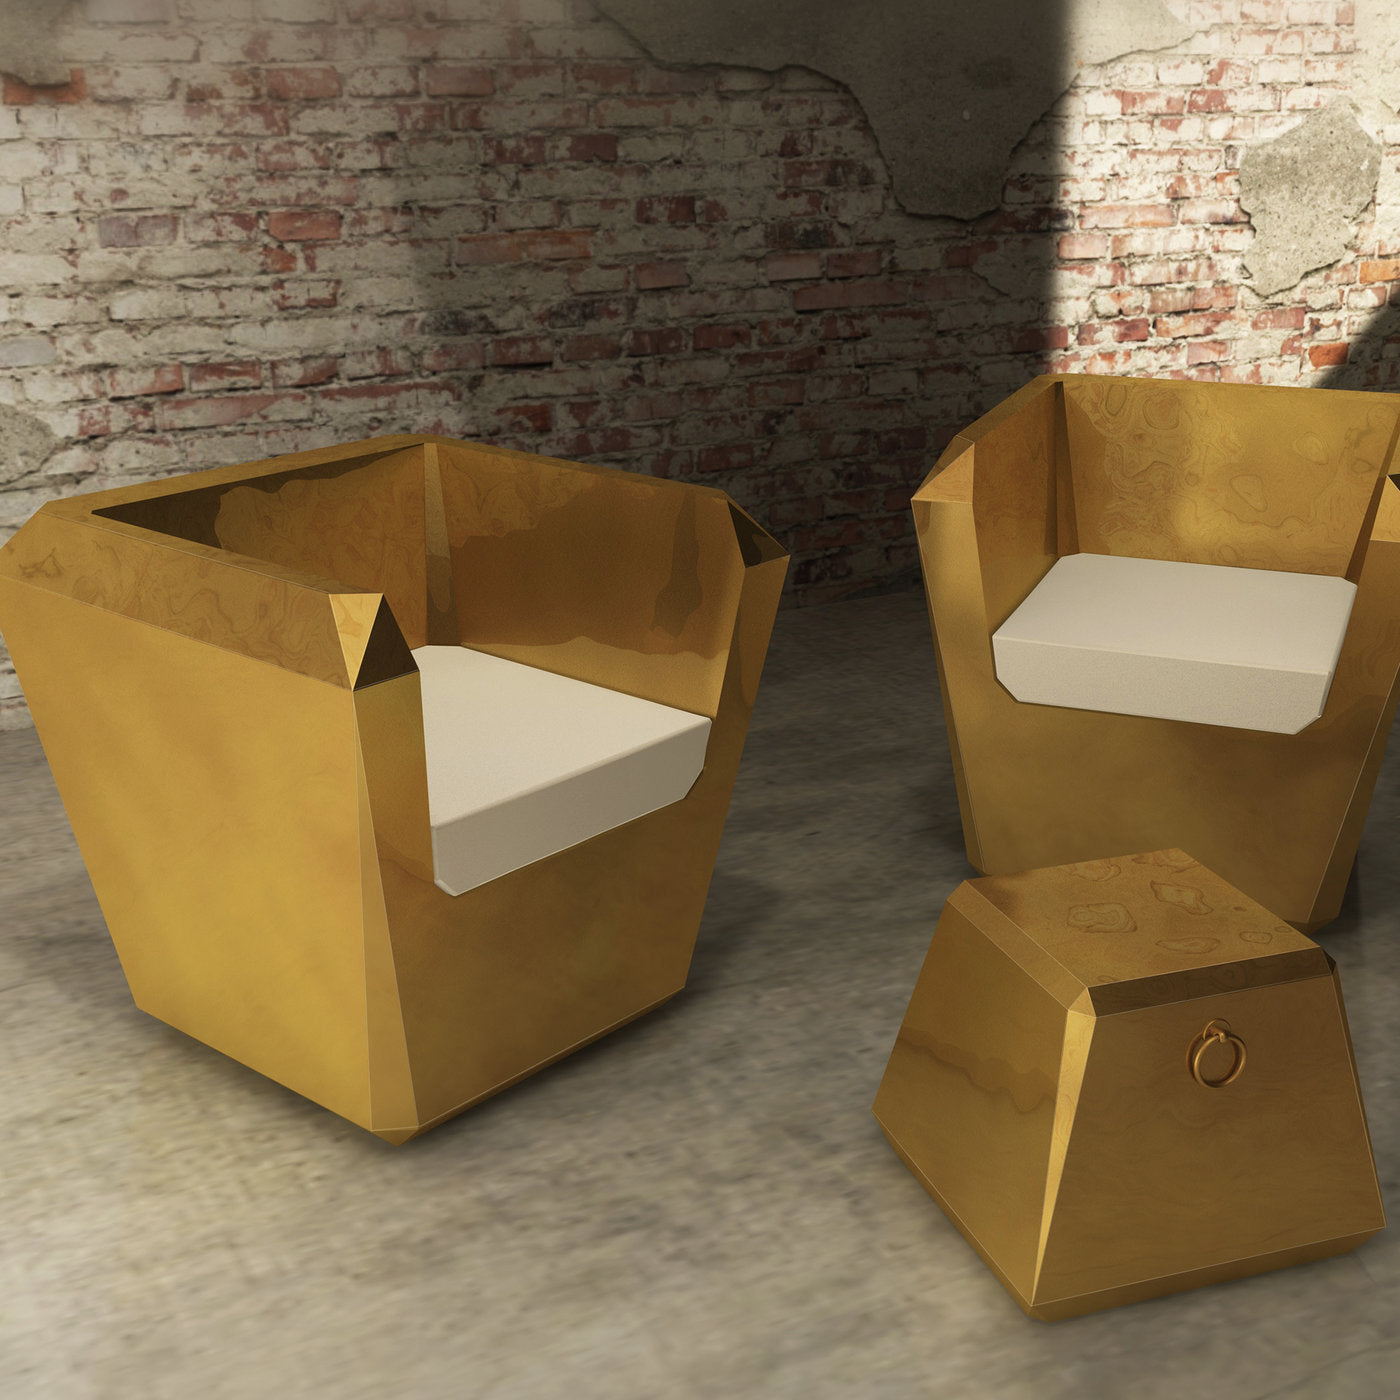 Lingotto Gold Armchair with Armrests by Garilab by Piter Perbellini - Alternative view 1